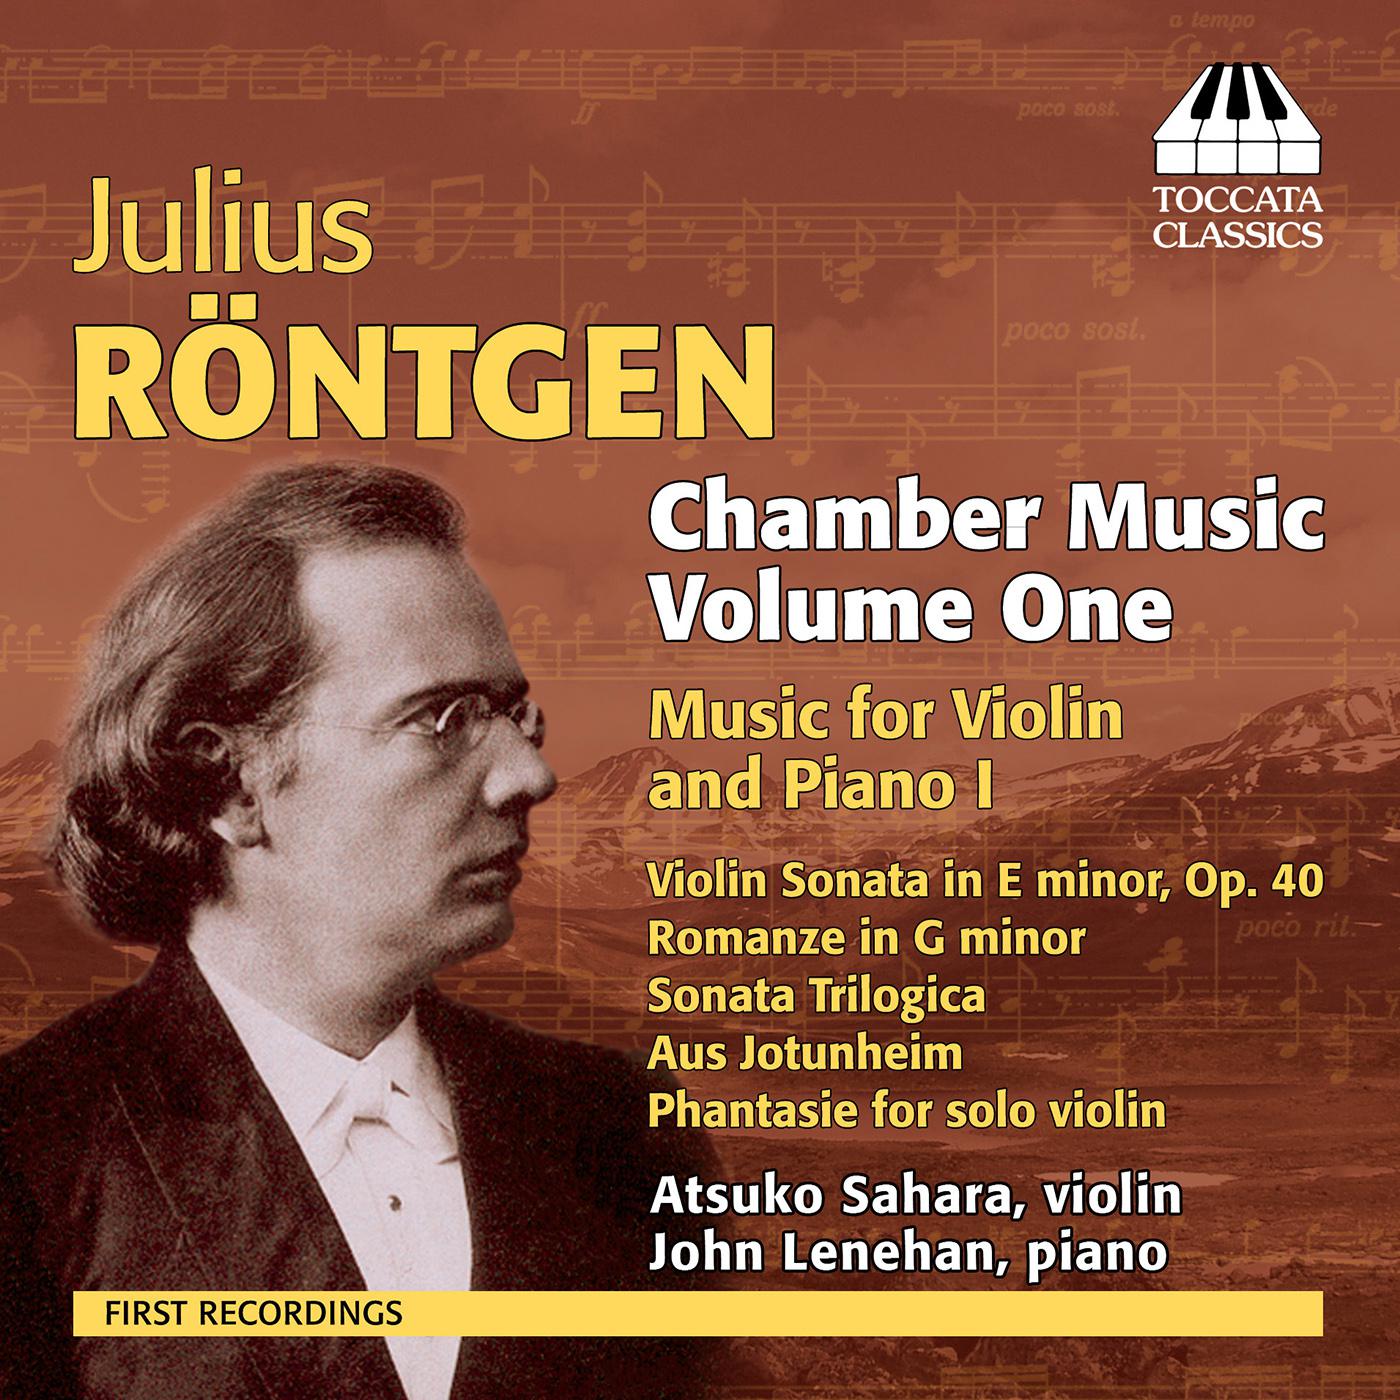 suite, aus jotunheim (version for violin and piano): ii